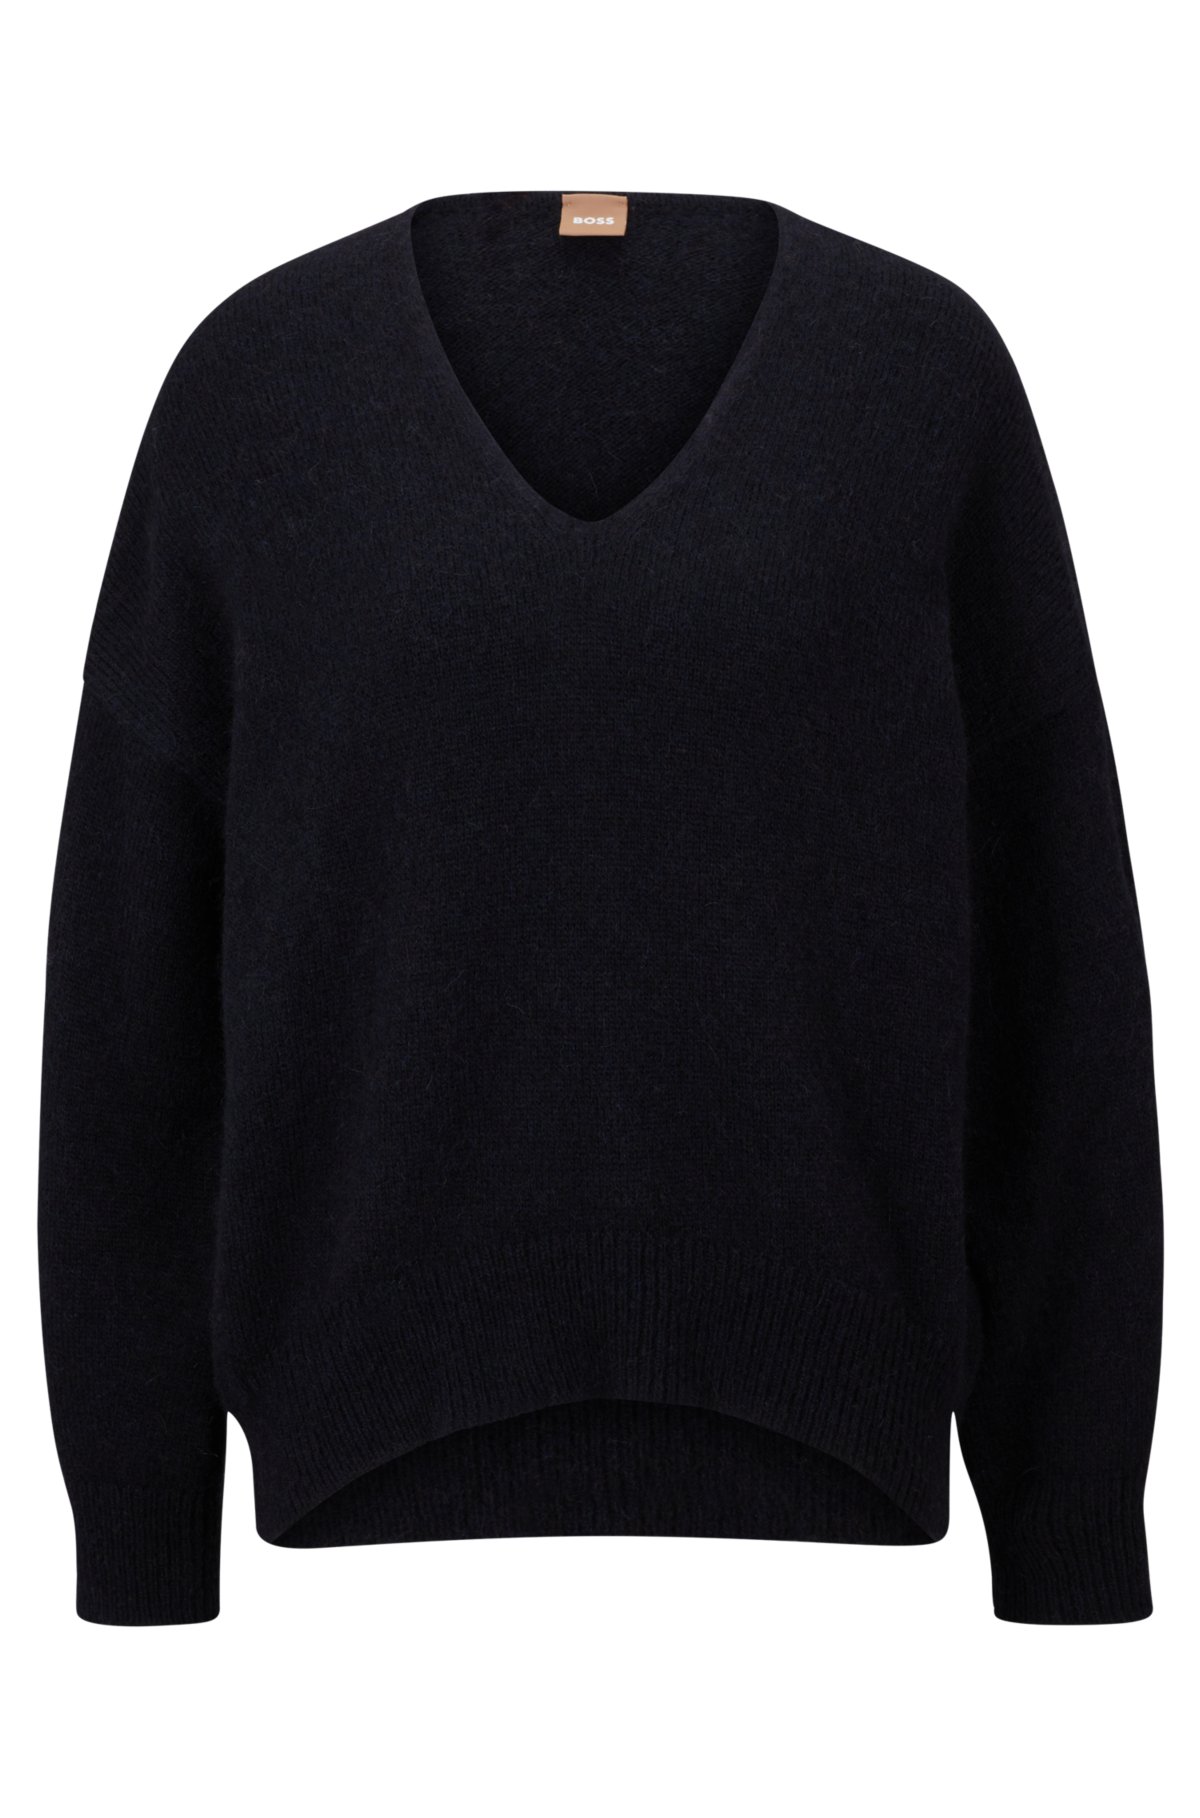 BOSS - Relaxed-fit V-neck sweater with alpaca and wool